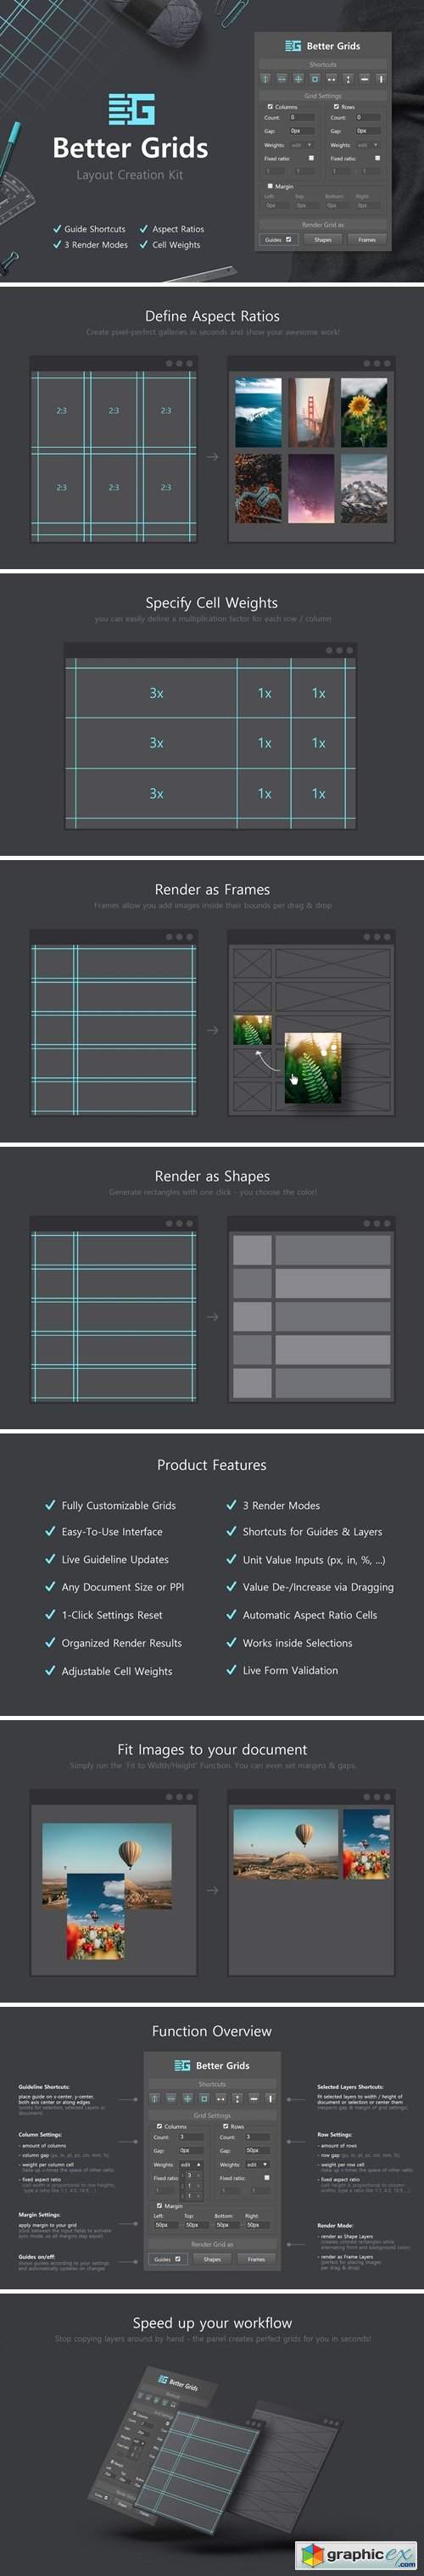 Better Grids - Layout Creation Kit